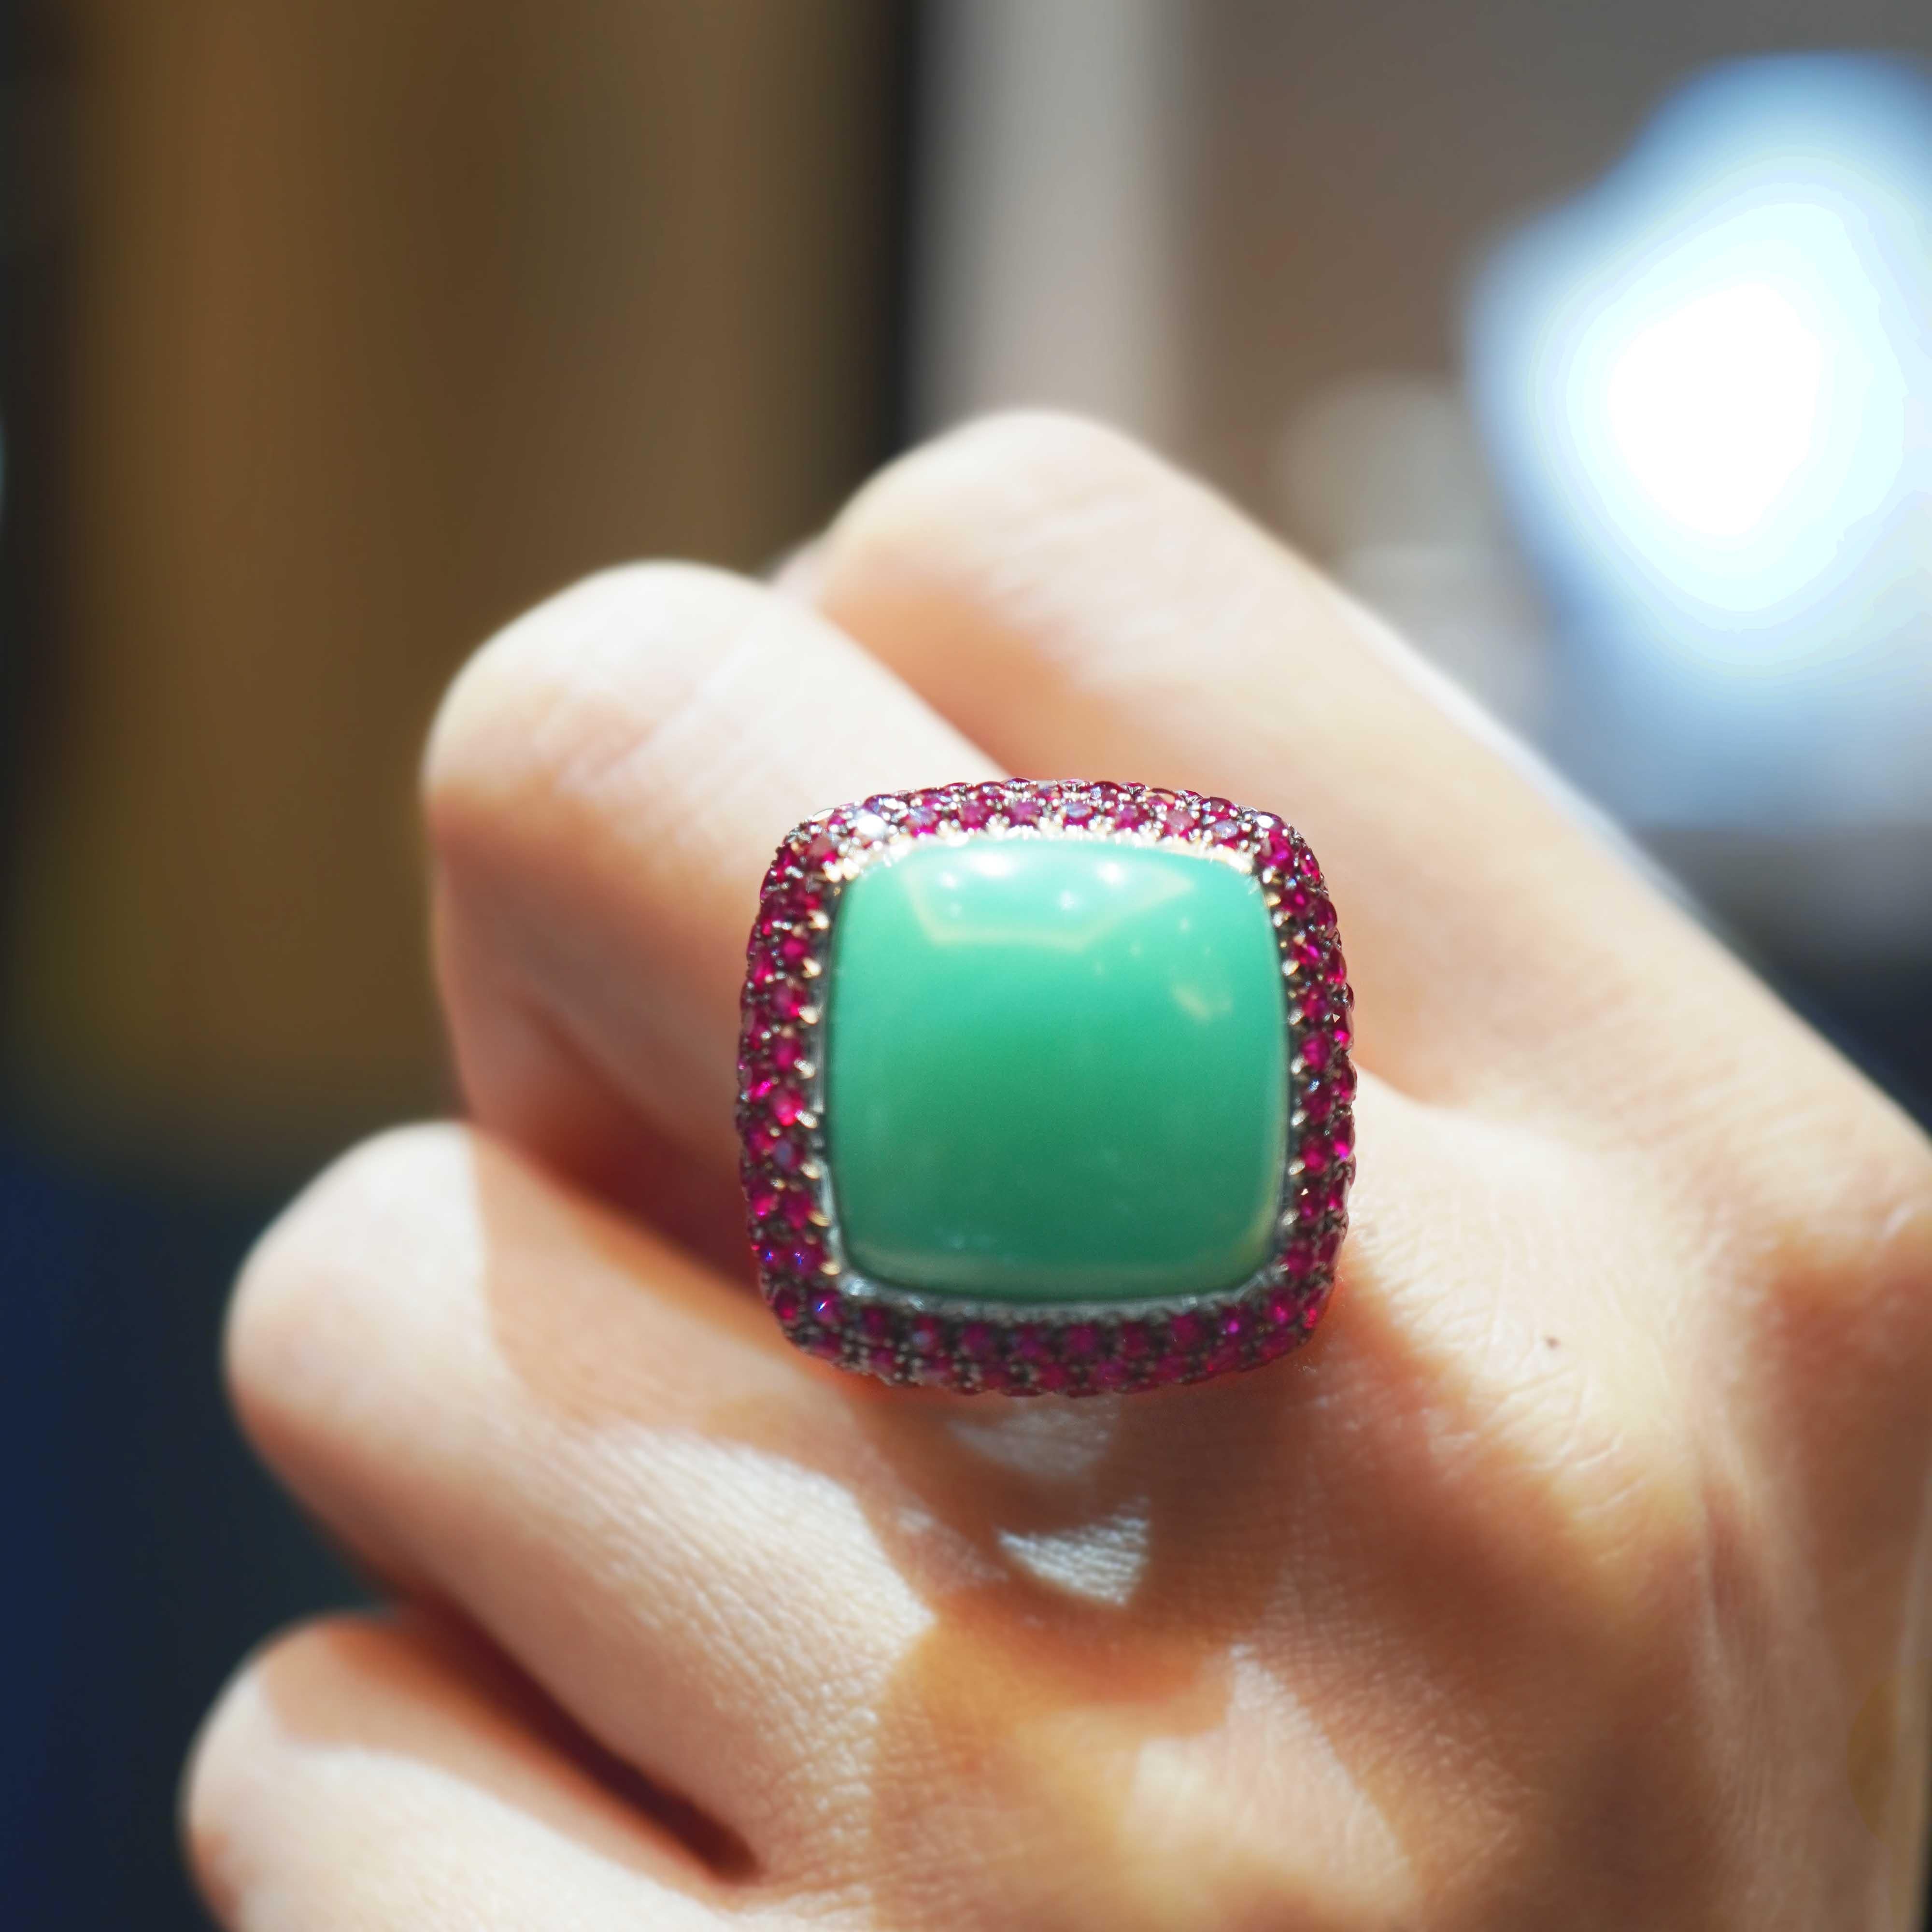 A soothing green 15.35 carat Chrysoprase is set along with 2.98 carat of vivid red ruby from Burma. The ring is made in 18 K gold and is hand made in Hong Kong. Chrysoprase, chrysophrase or chrysoprasus is a gemstone variety of chalcedony (a